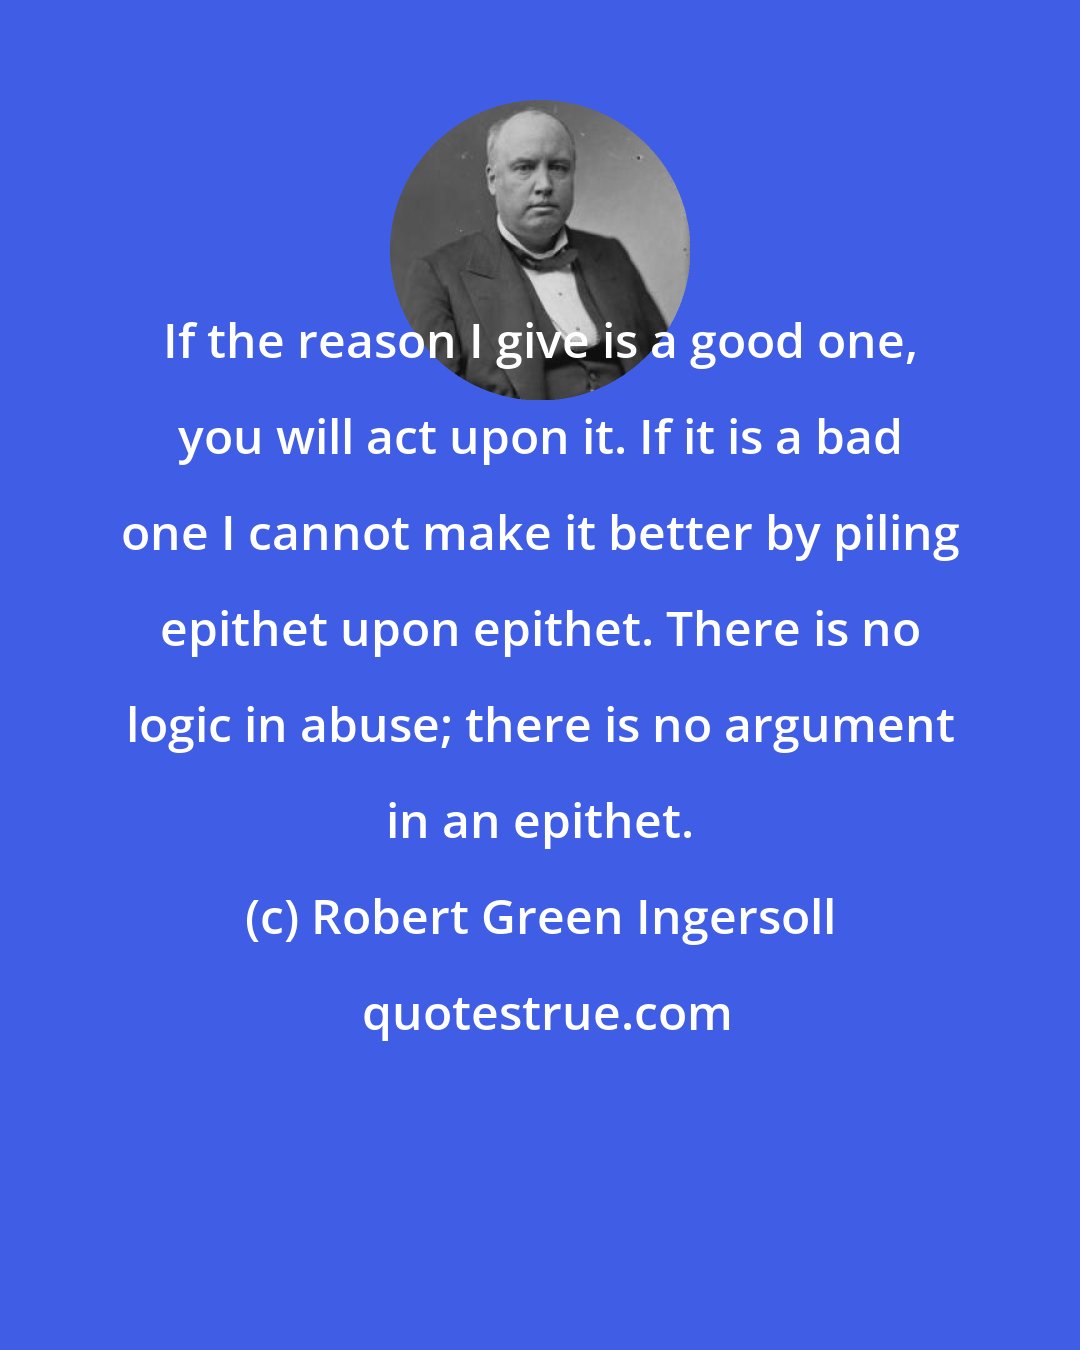 Robert Green Ingersoll: If the reason I give is a good one, you will act upon it. If it is a bad one I cannot make it better by piling epithet upon epithet. There is no logic in abuse; there is no argument in an epithet.